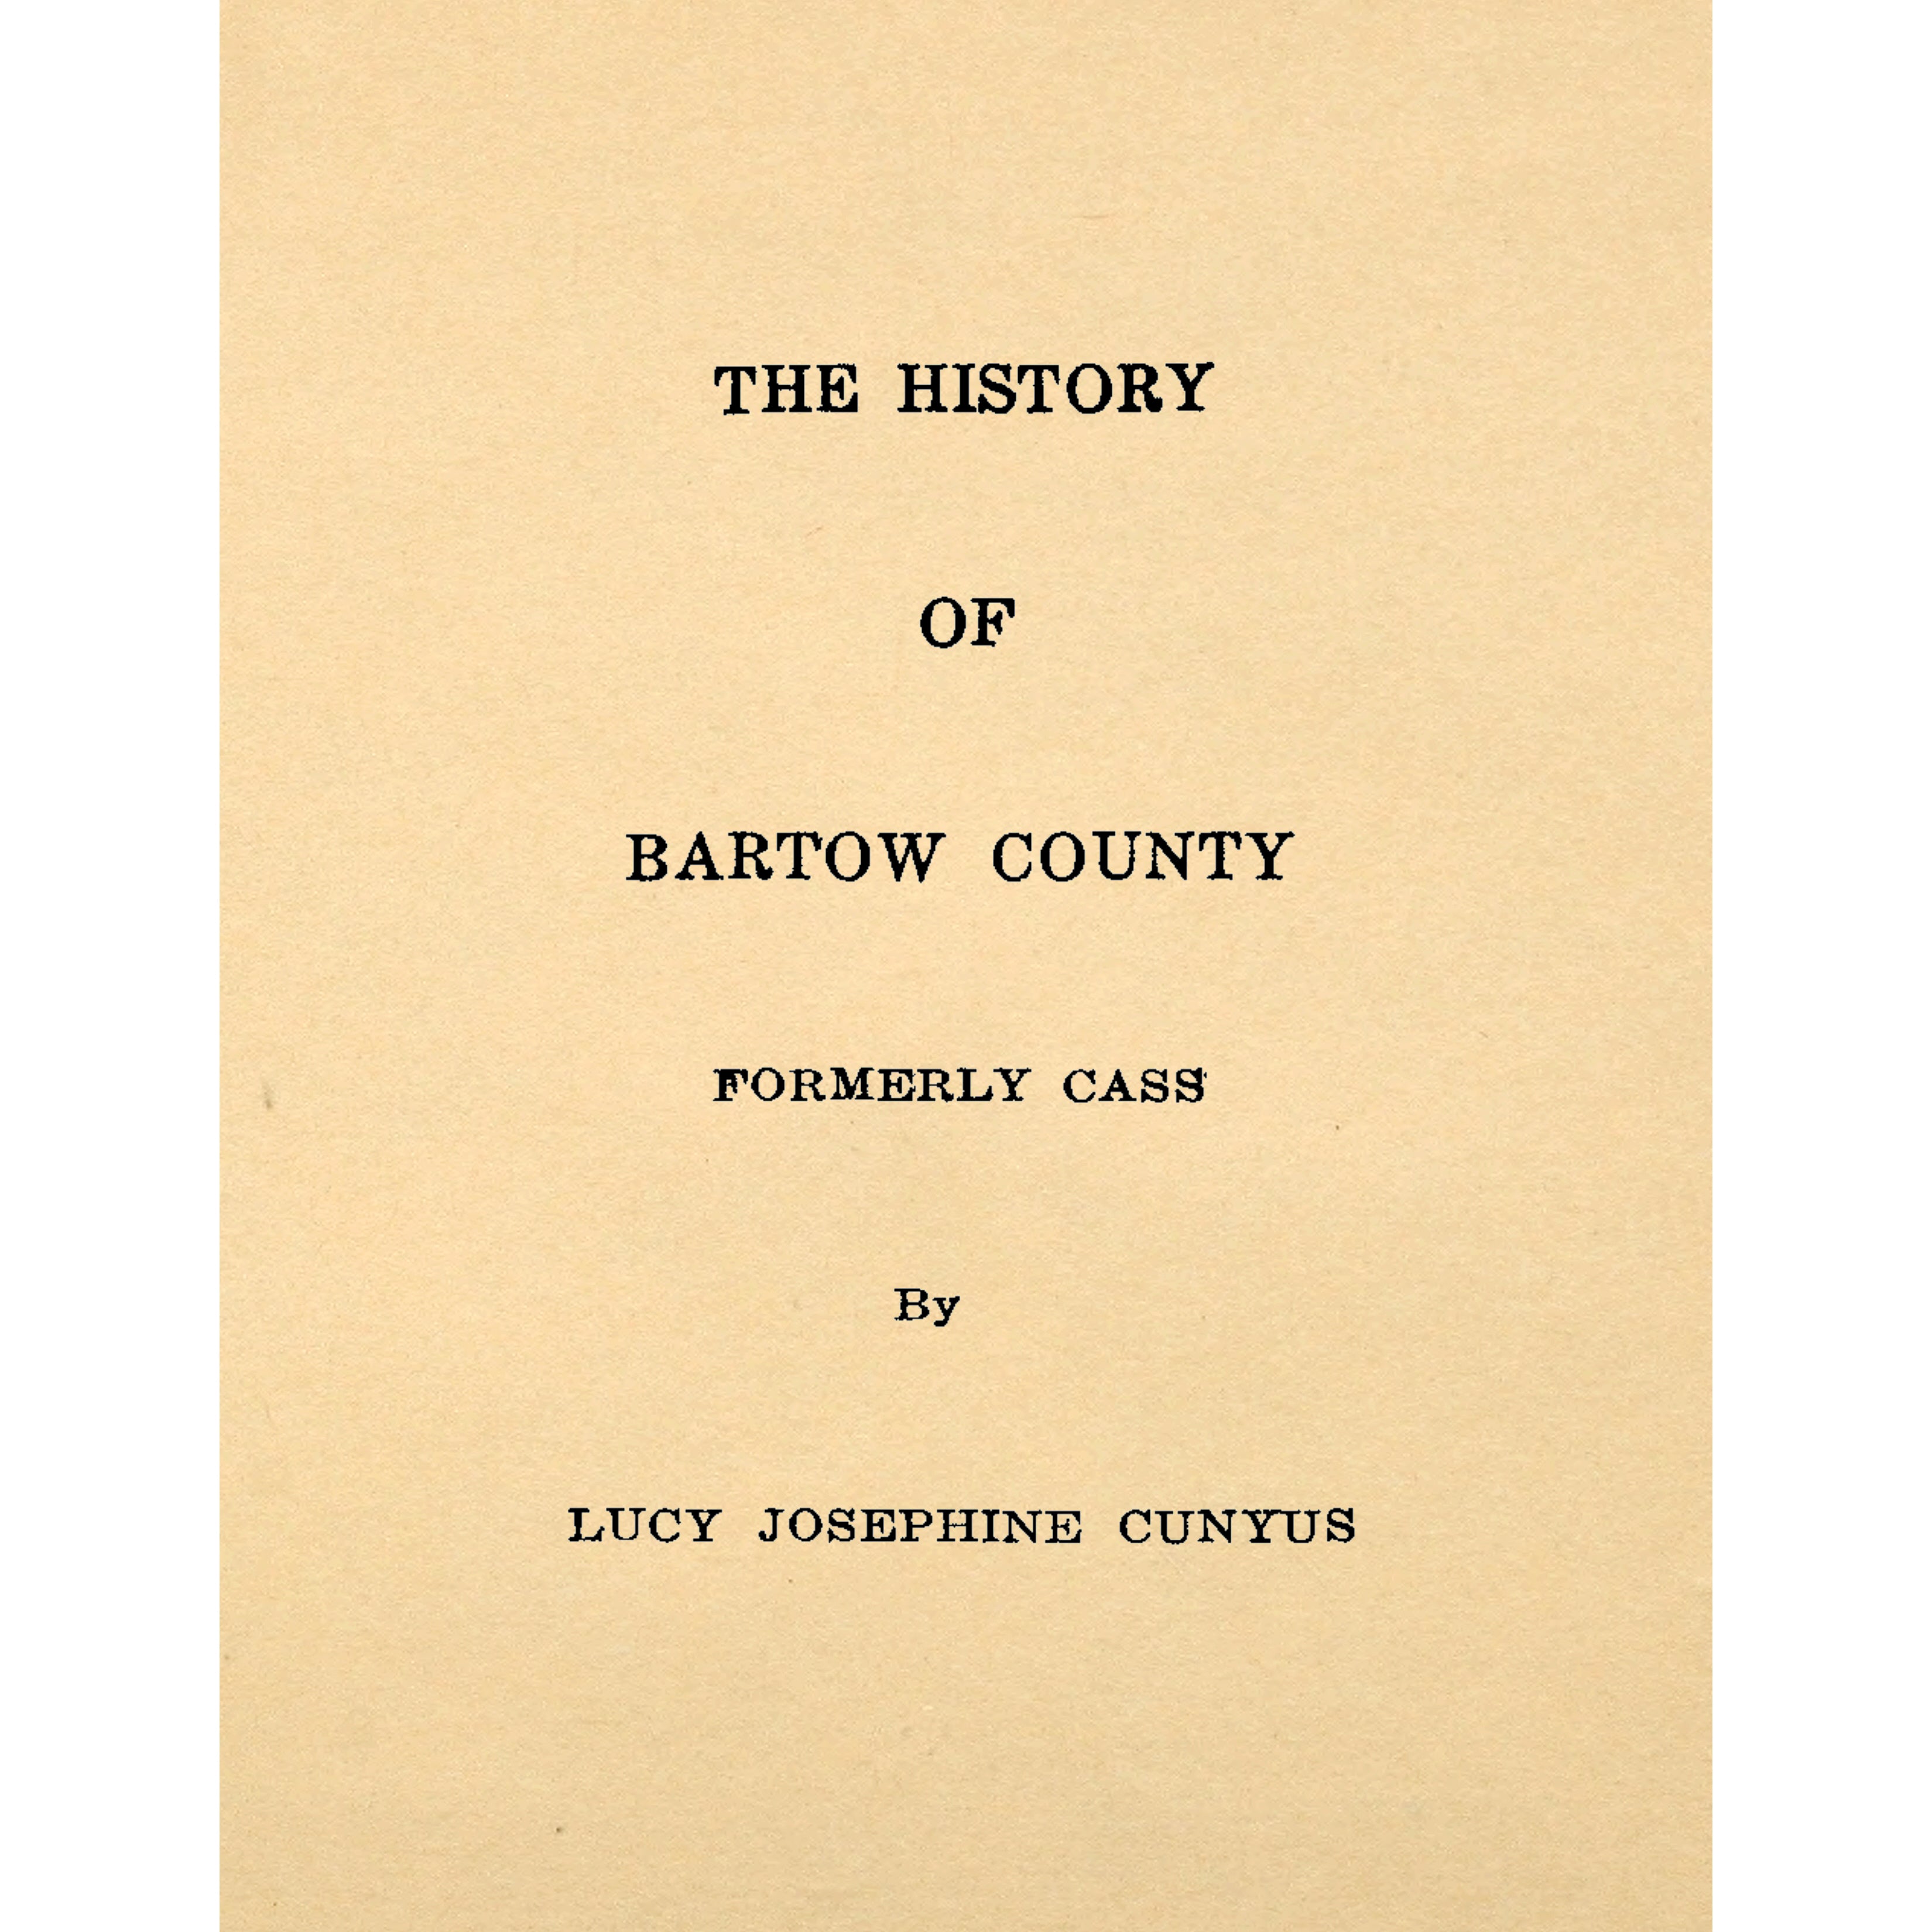 The History of Bartow County [Georgia] Formerly Cass